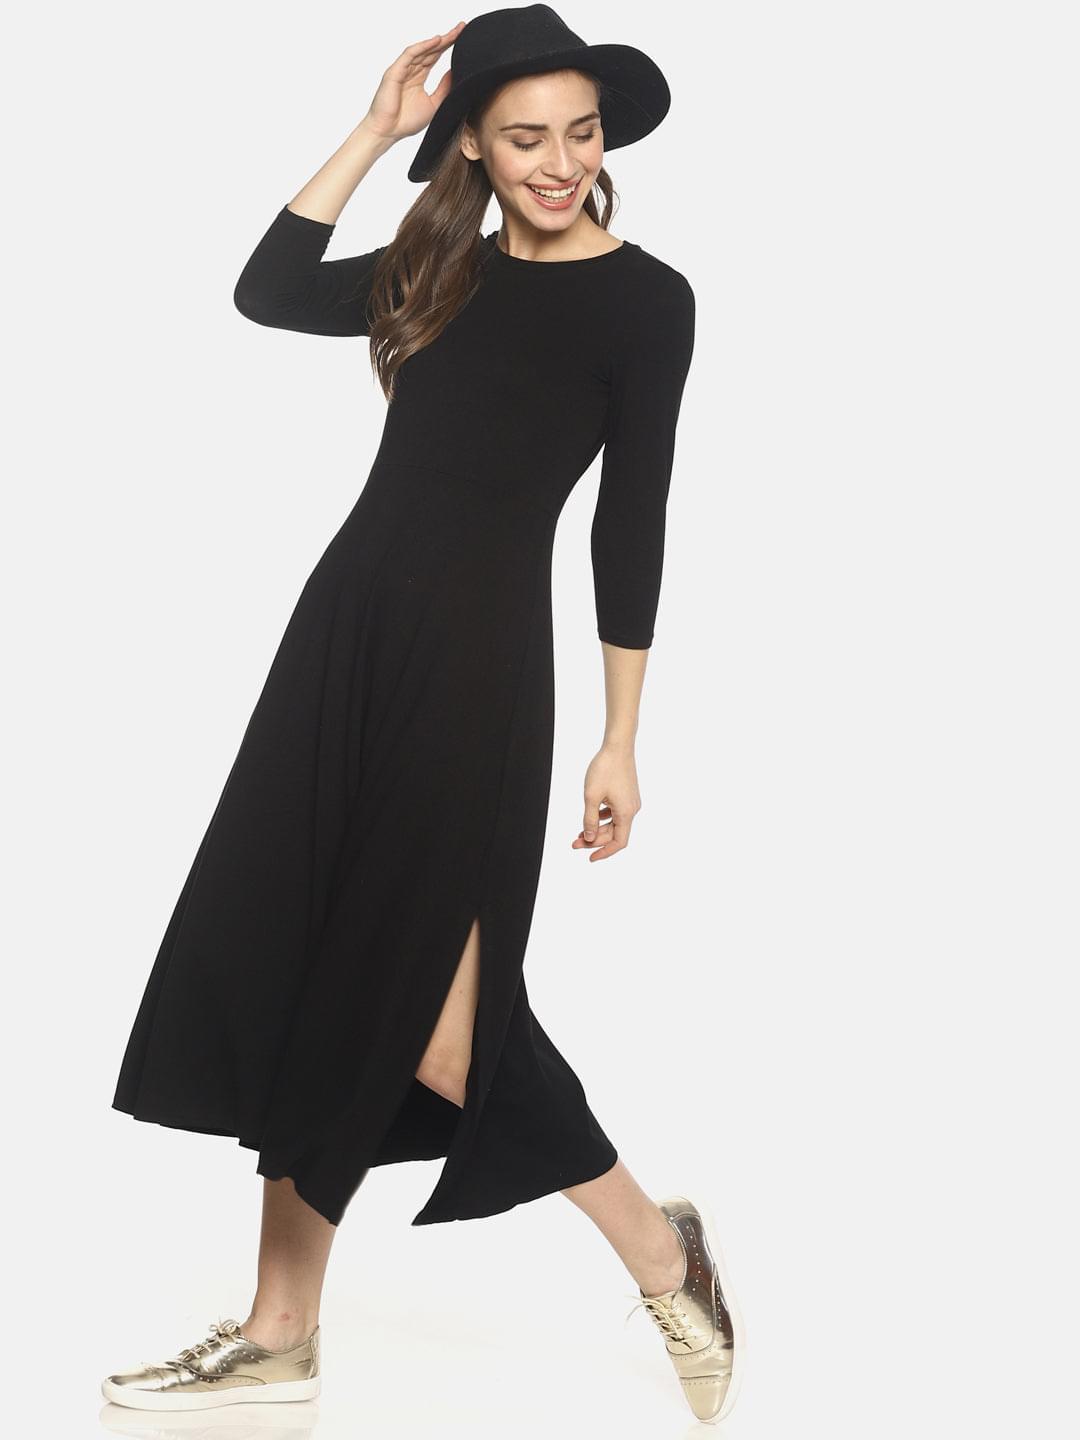 Black Fitted Knit Dress